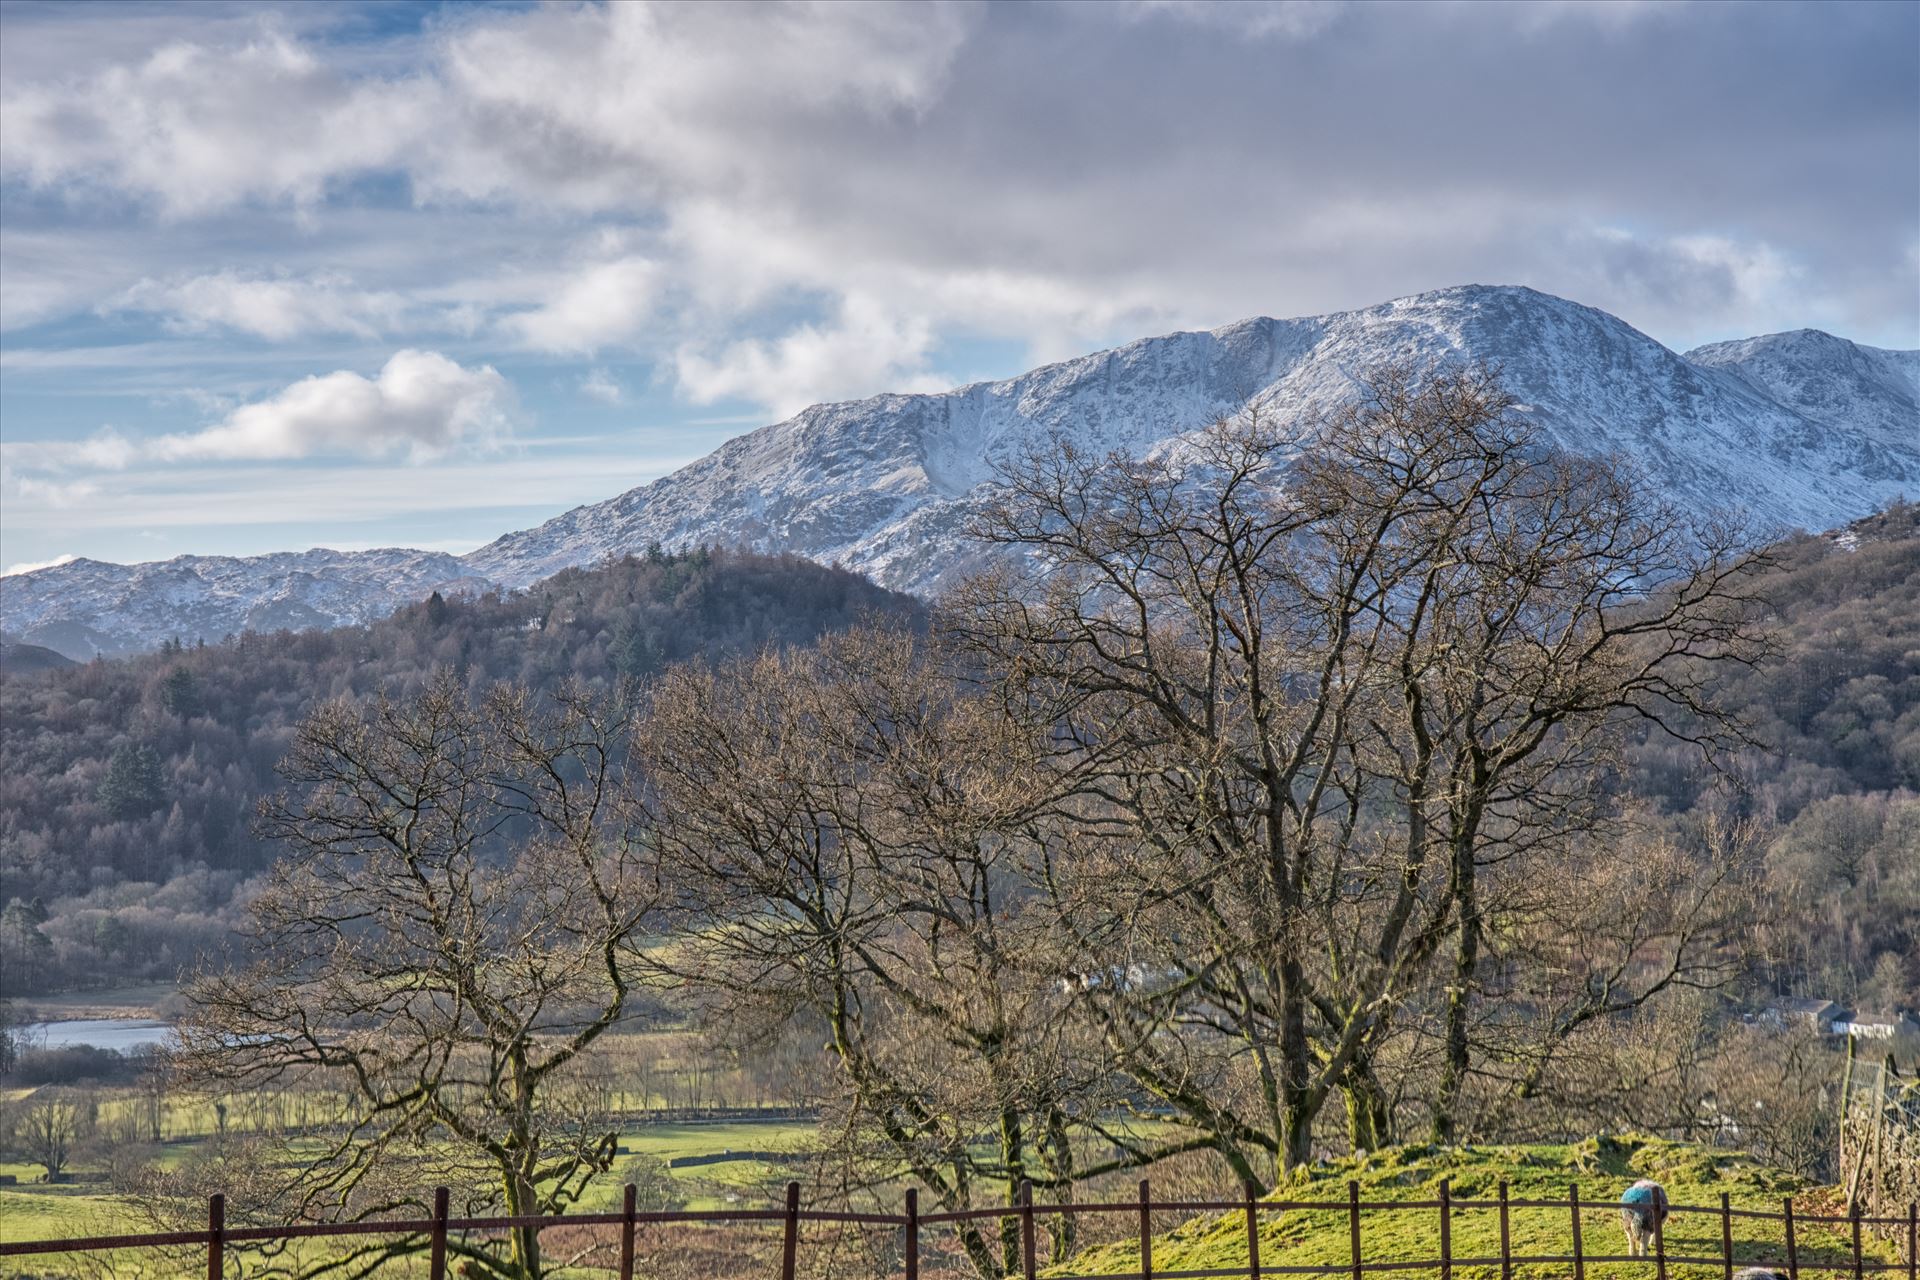 Snowy mountains - A snowy landscape shot taken in the Lake District. by philreay